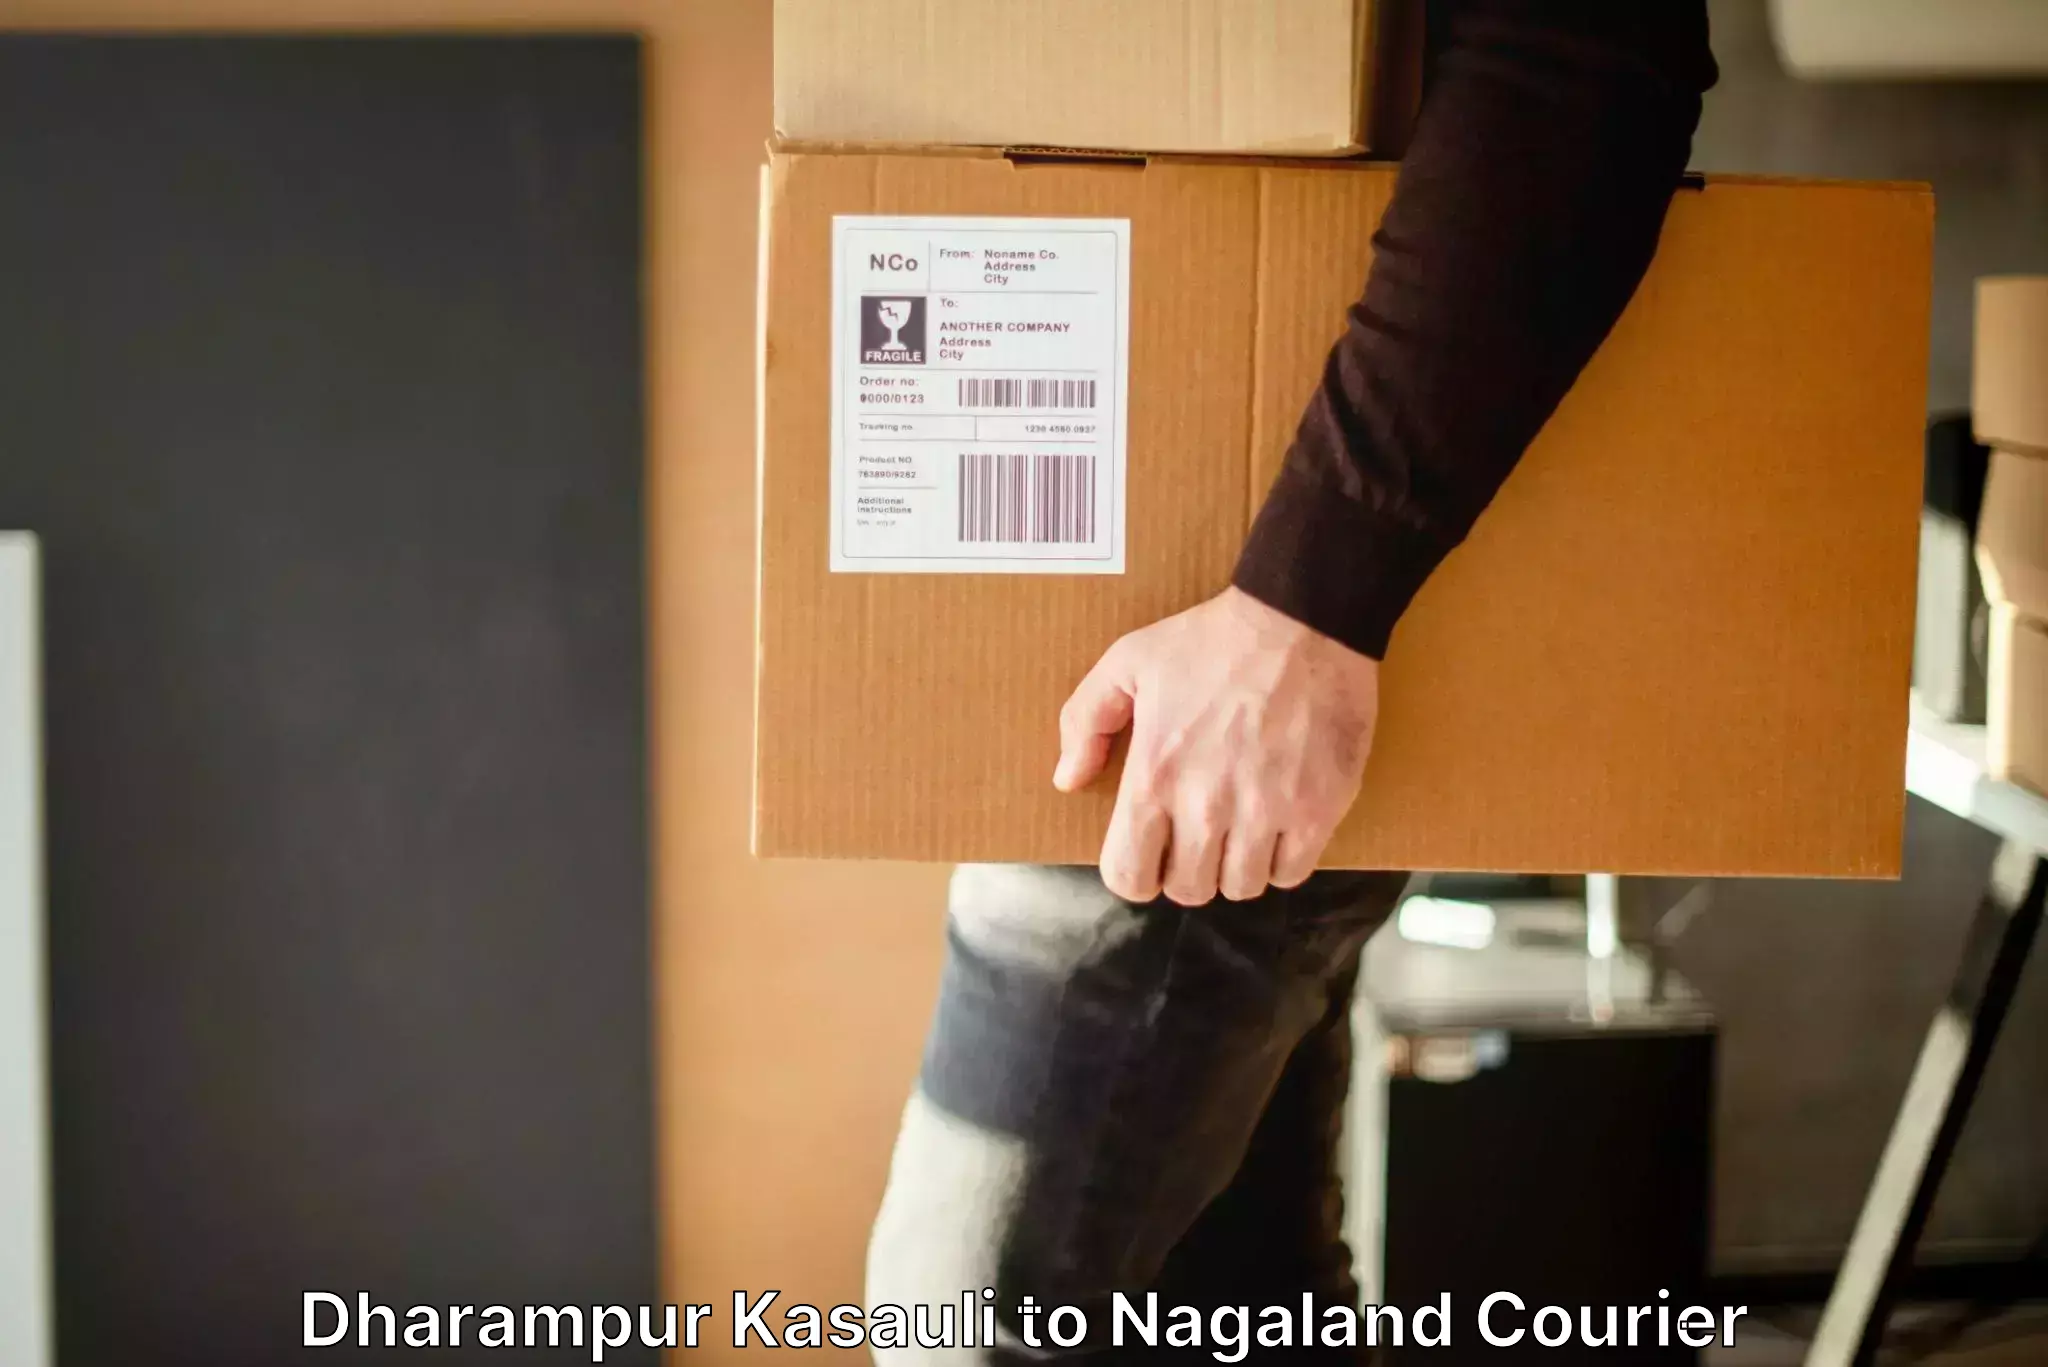 Luggage shipment specialists Dharampur Kasauli to Mon